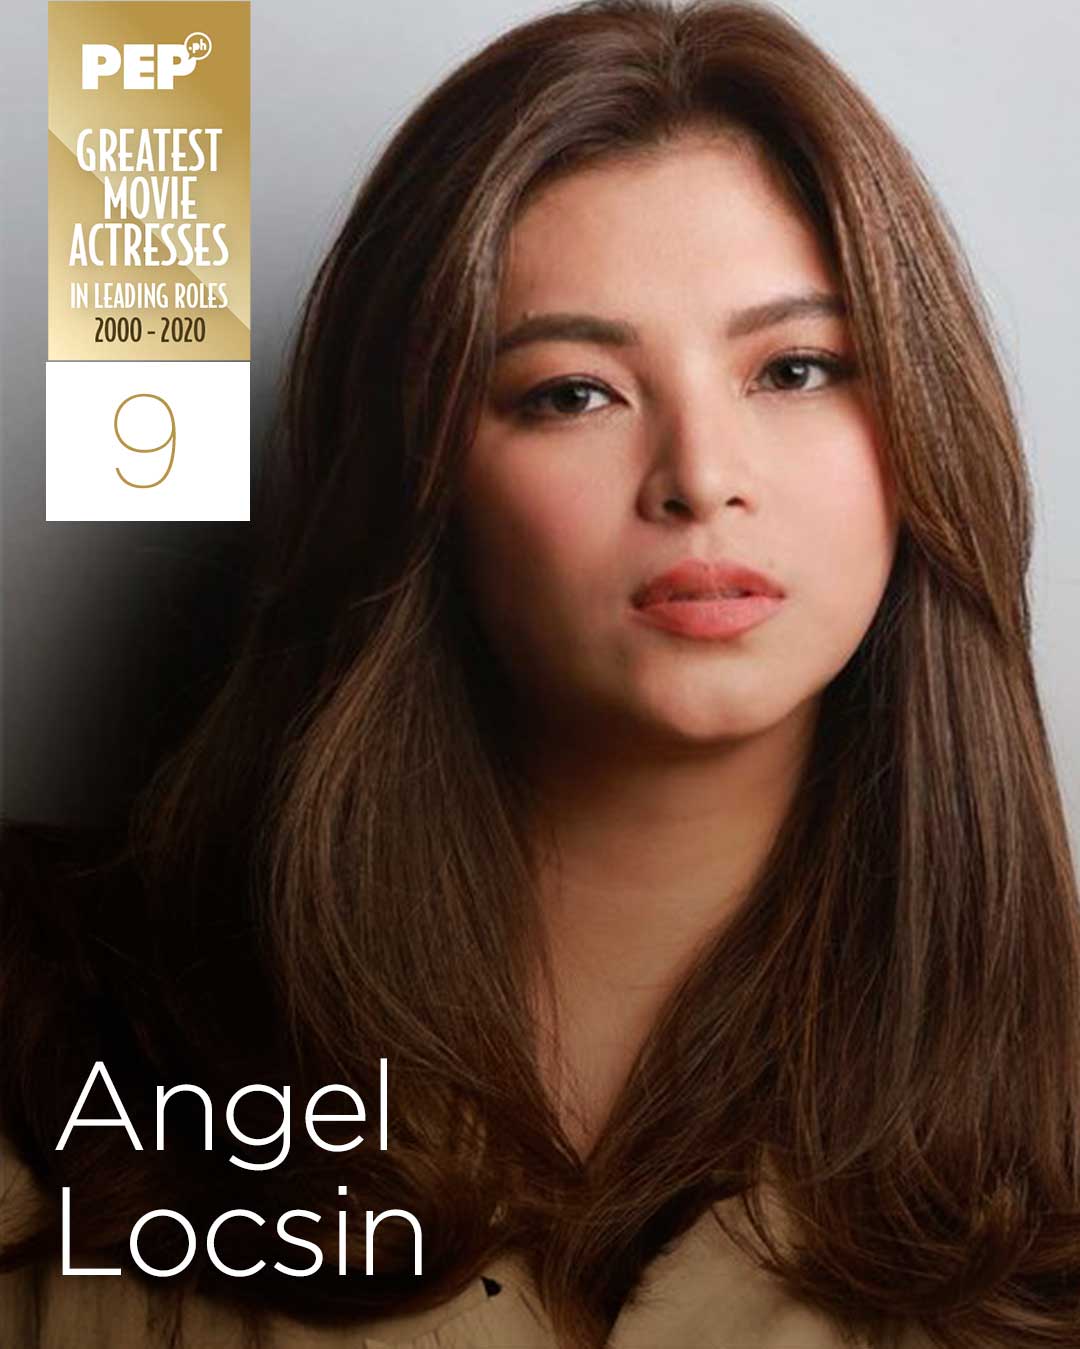 Angel Locsin Ranks 9th On Pep Ph S Greatest Movie Actresses In A Leading Roles 2000 2020